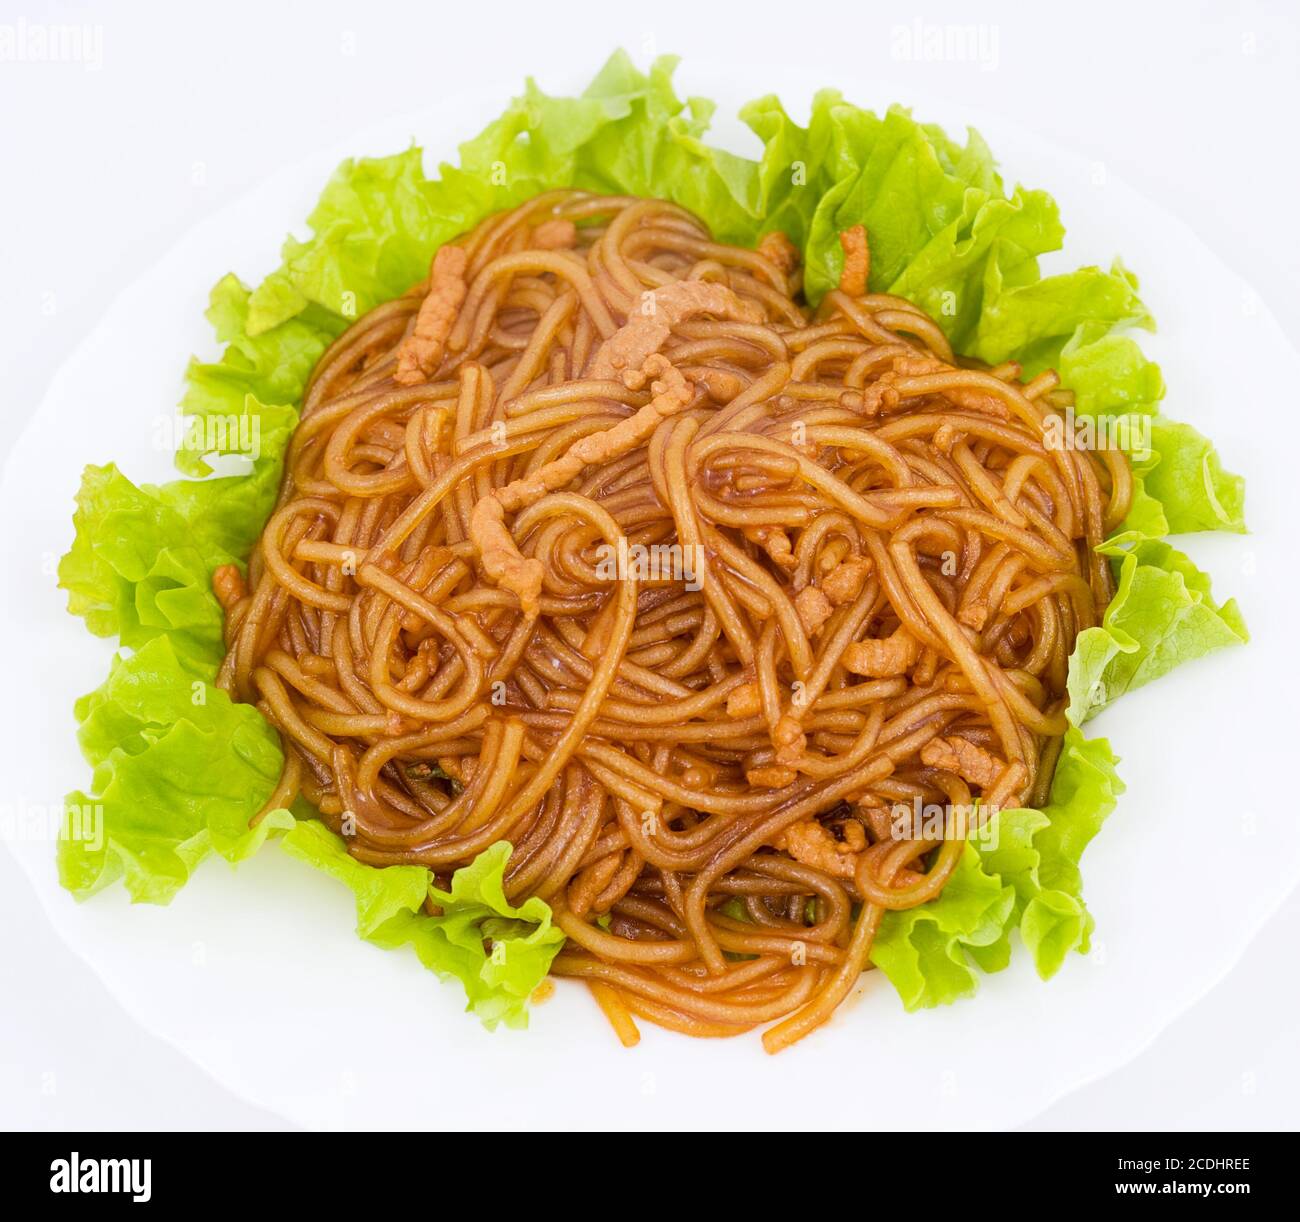 noodles and meat in sour sweet sauce Stock Photo